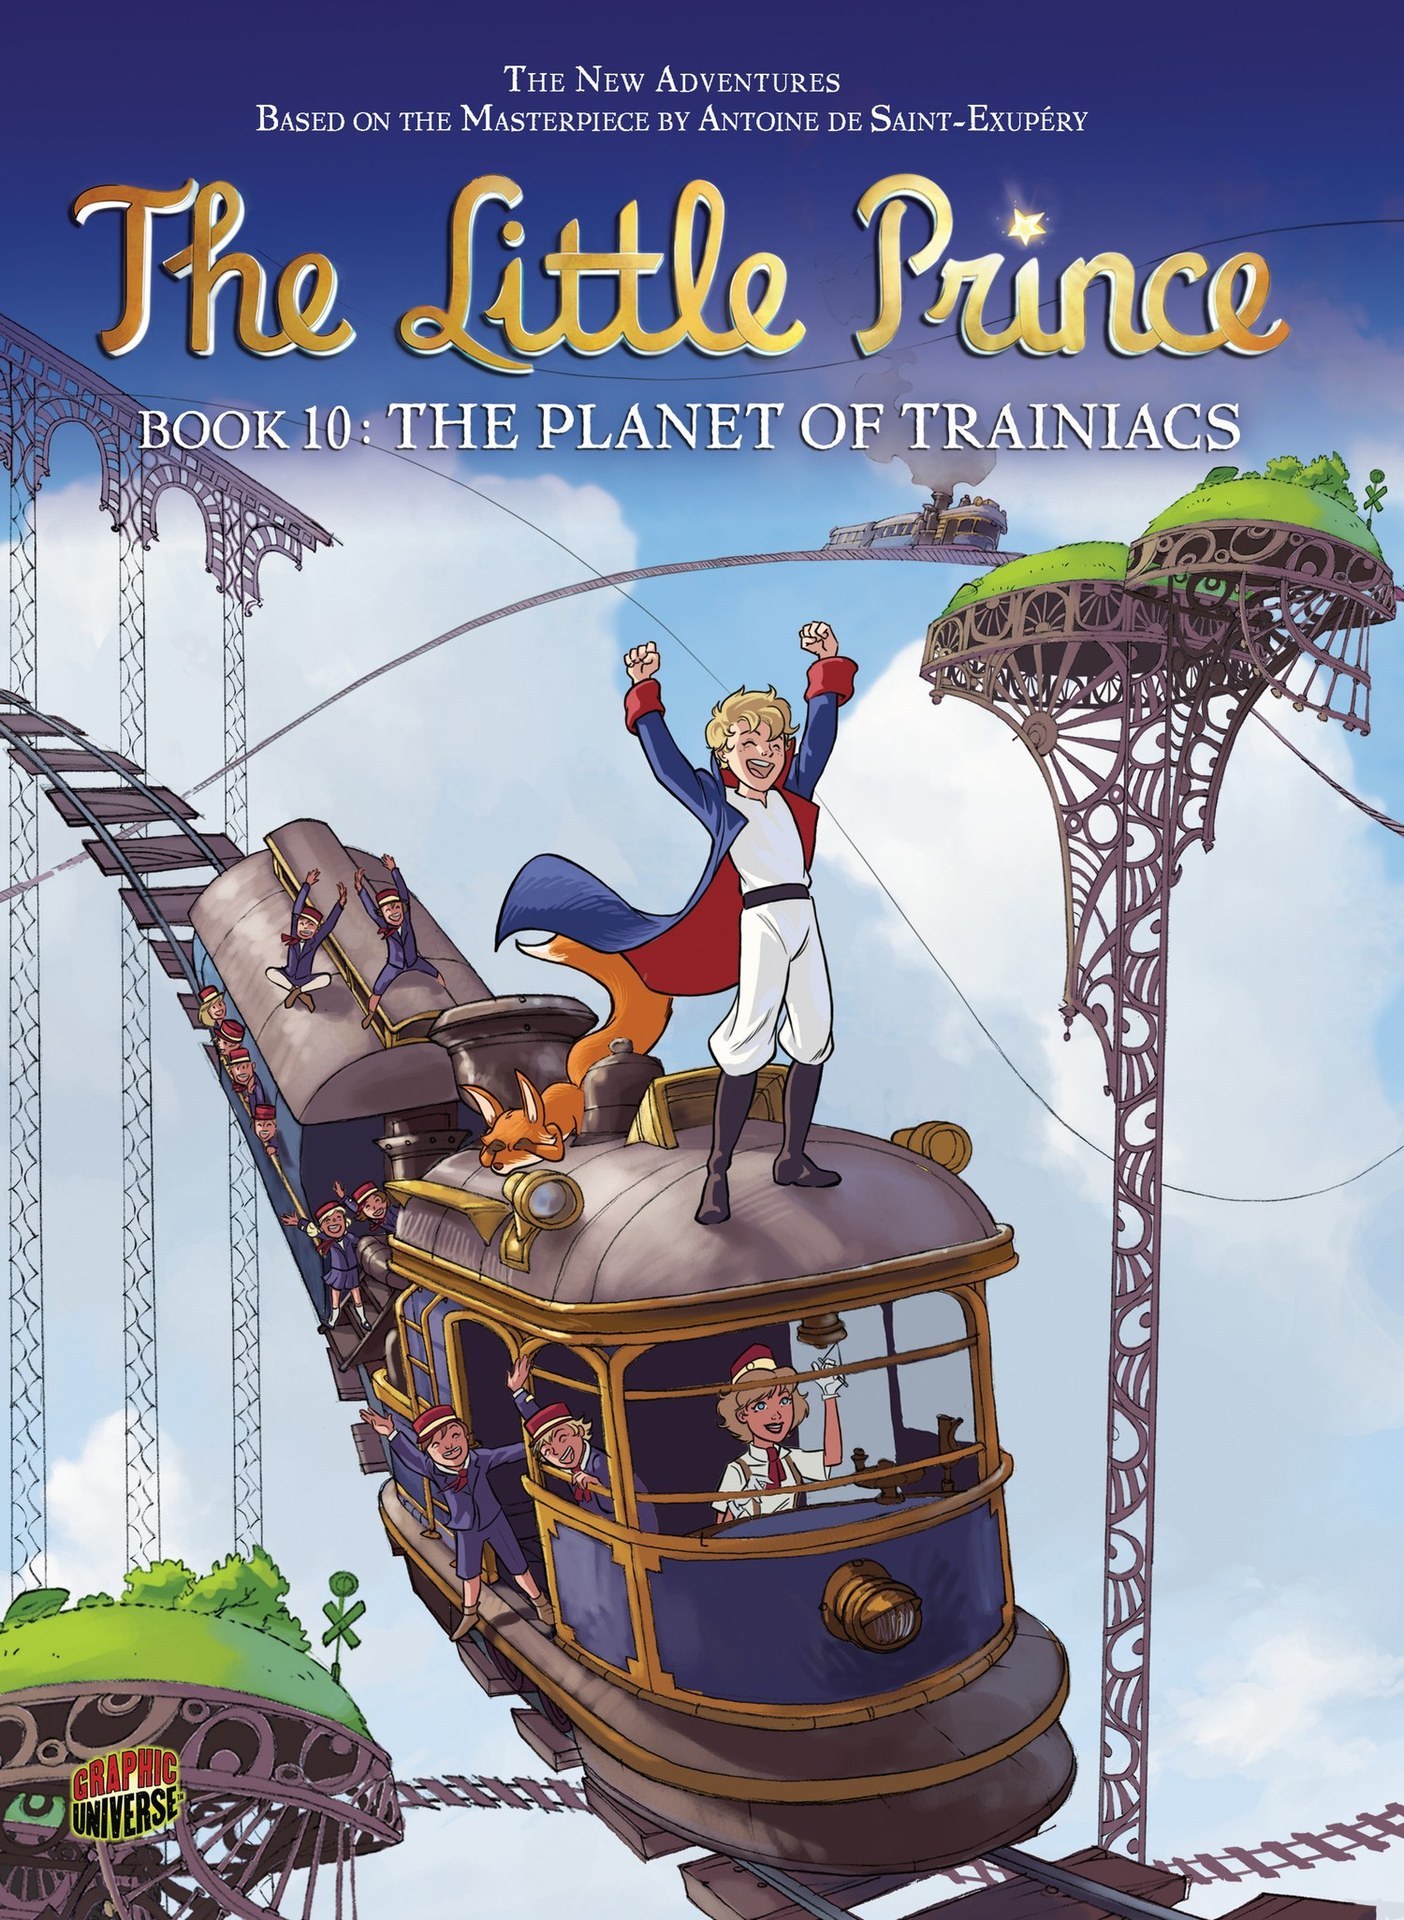 The Little Prince Issue 10 | Read The Little Prince Issue 10 comic online  in high quality. Read Full Comic online for free - Read comics online in  high quality .|viewcomiconline.com